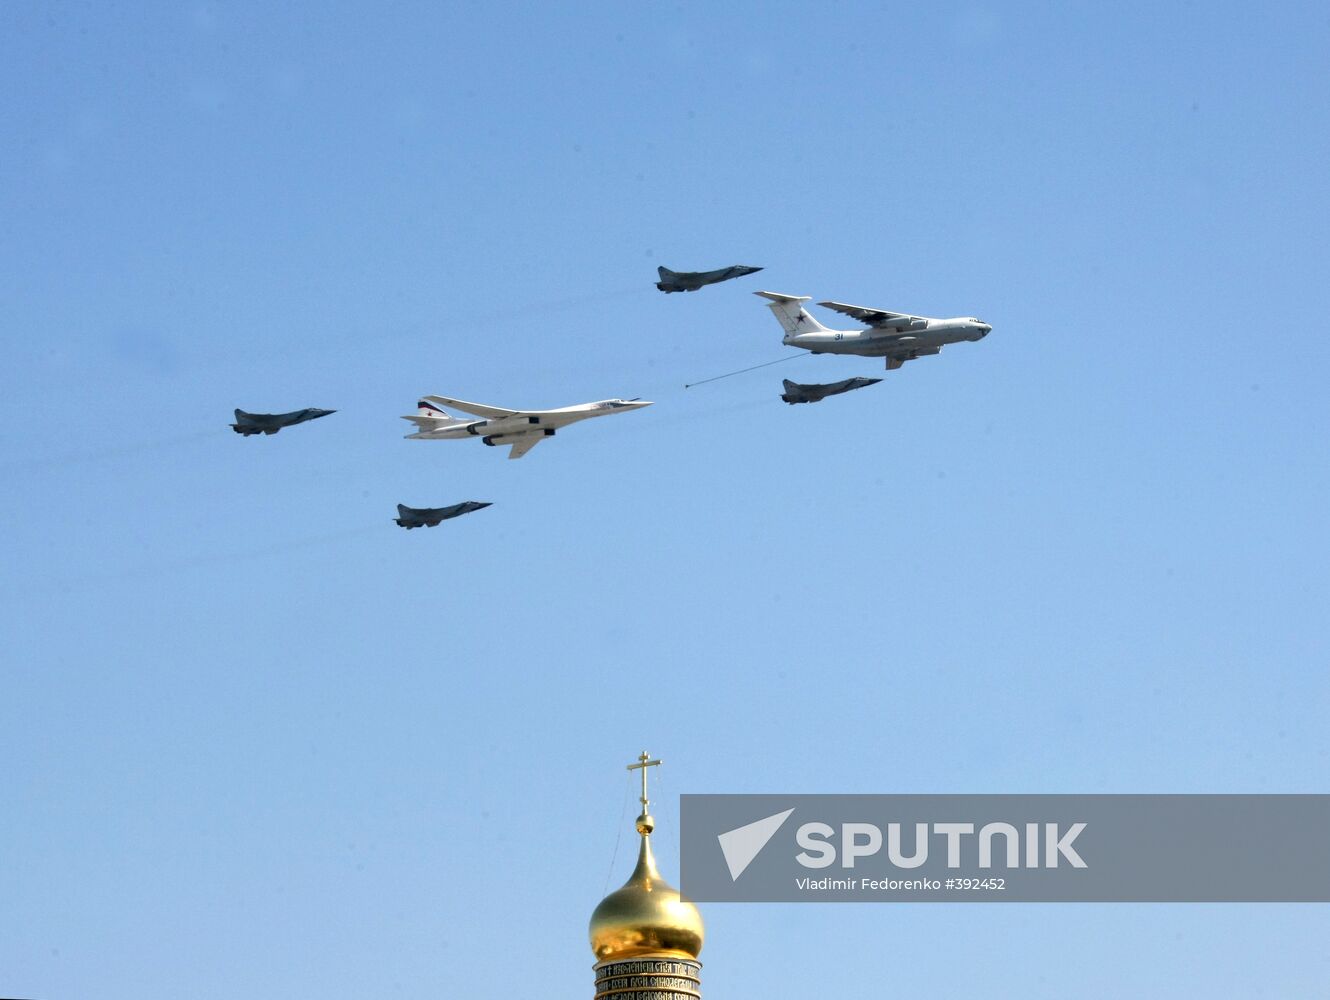 Warplanes take part in Victory Day parade in Moscow